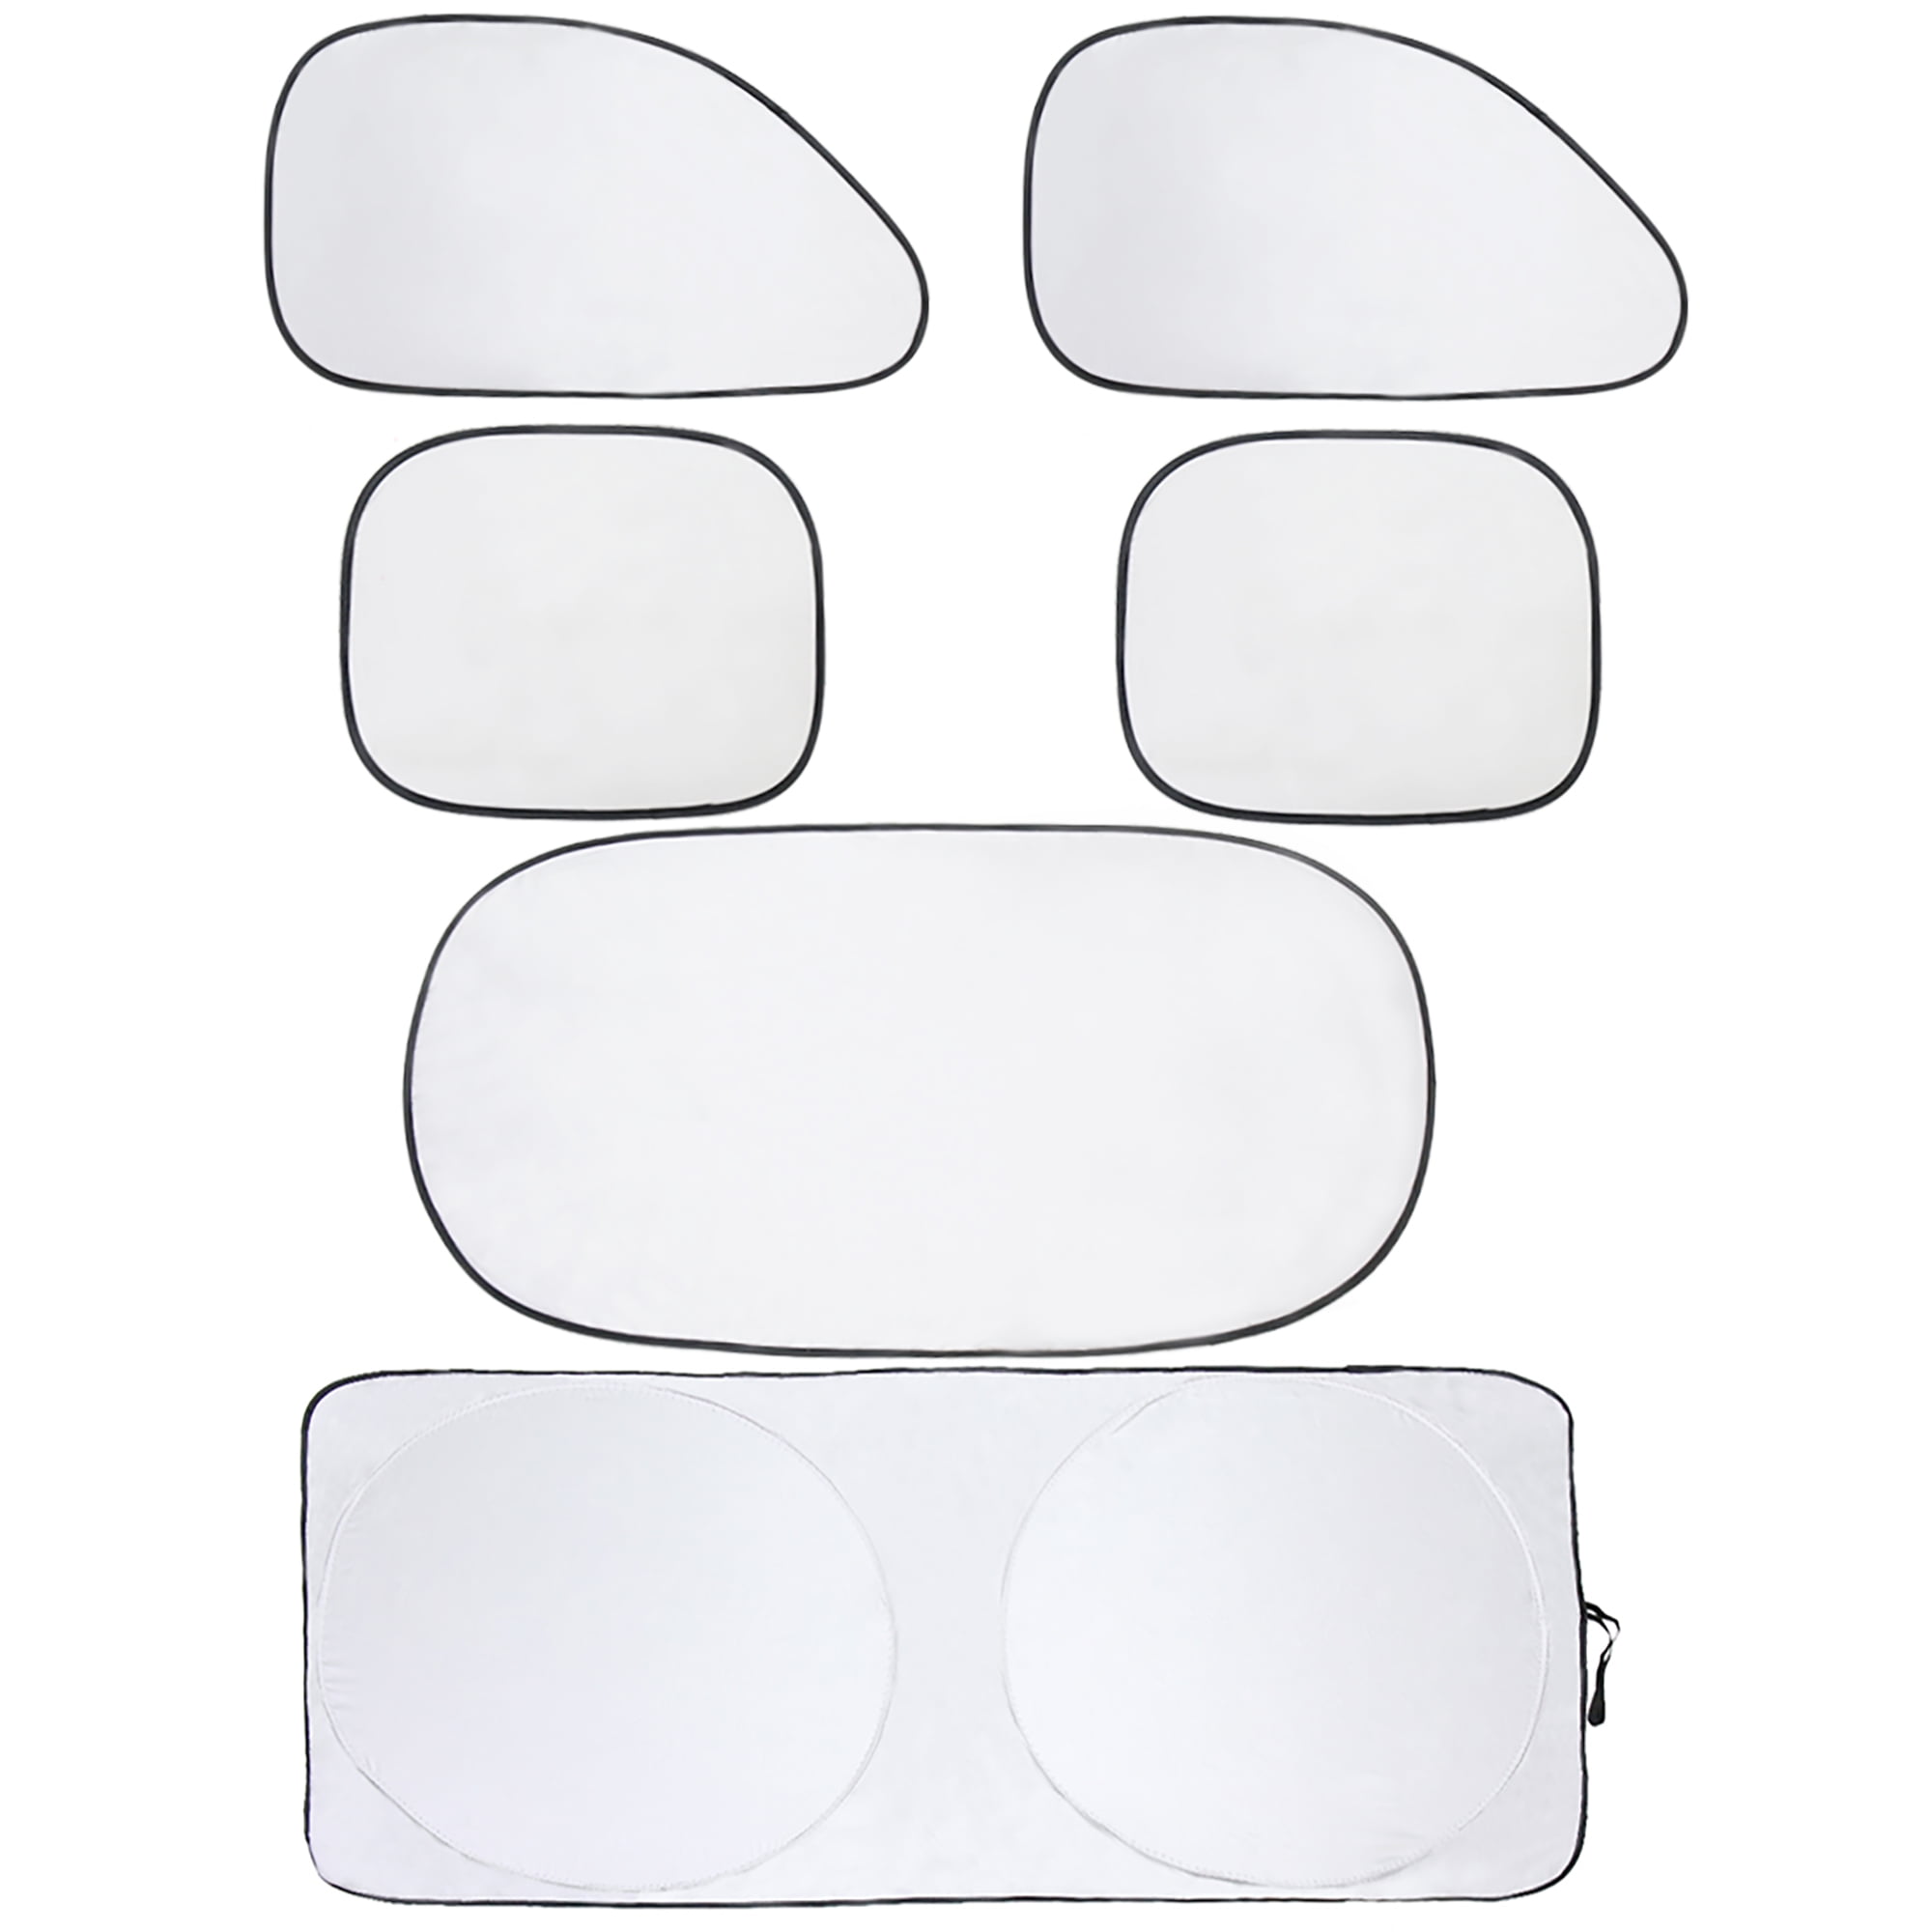 Sunshade Combo Pack 003793A Plasticolor Chevy 5-Piece Combo Pack 